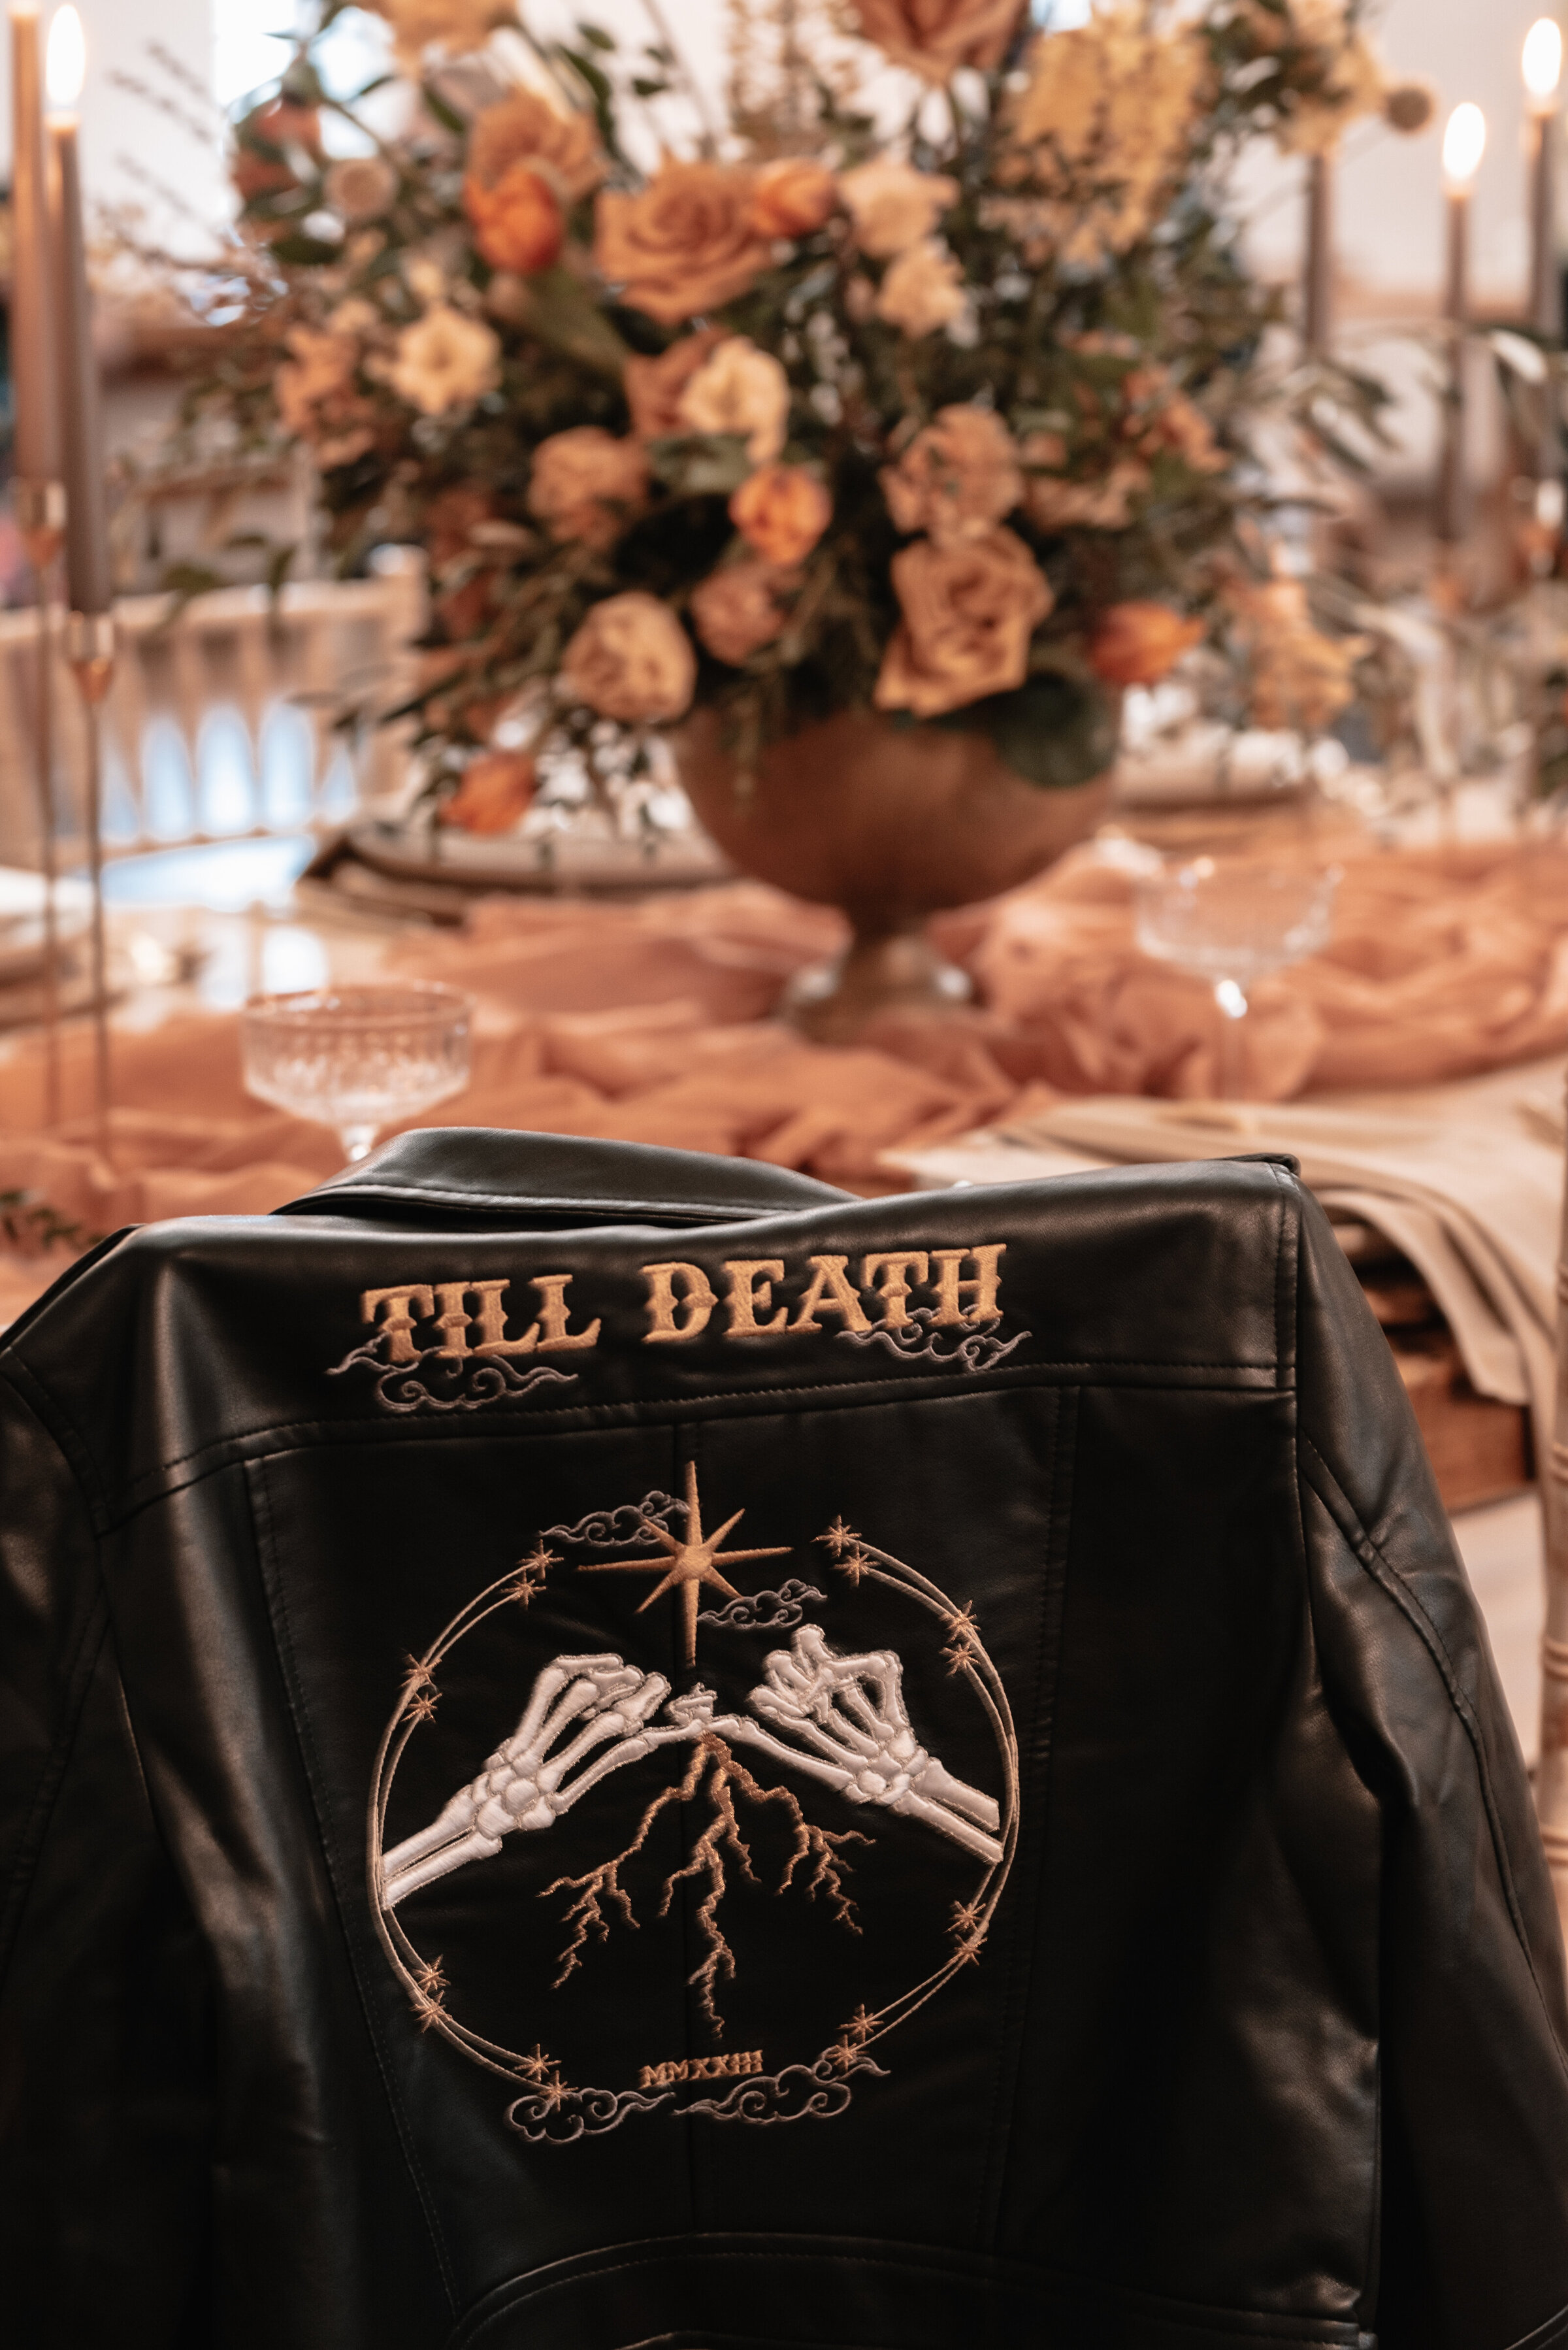 Leather bridal jacket embroidered with till death and skeleton hands holding pinkie fingers in front of floral arrangement